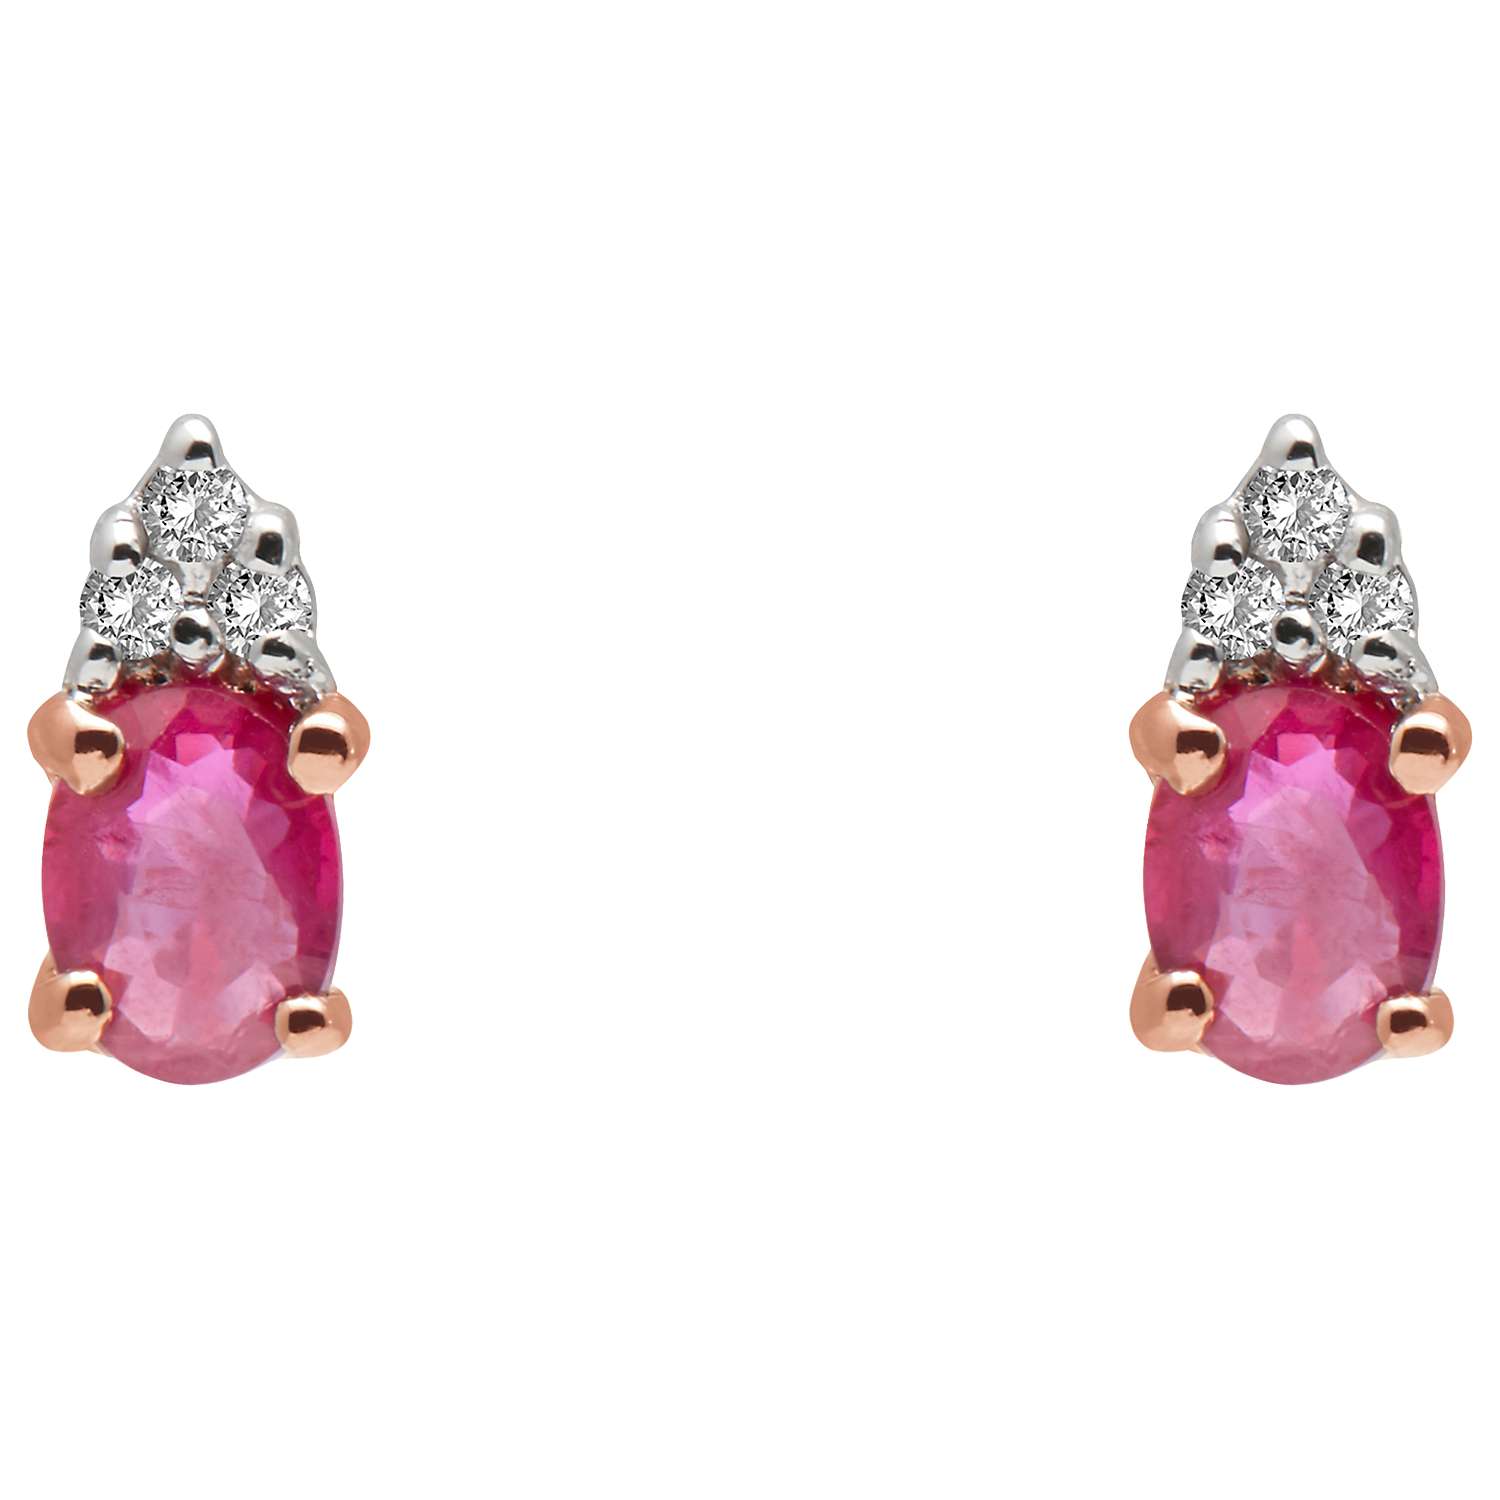 Buy A B Davis 9ct Gold Oval Diamond and Precious Stone Stud Earrings Online at johnlewis.com